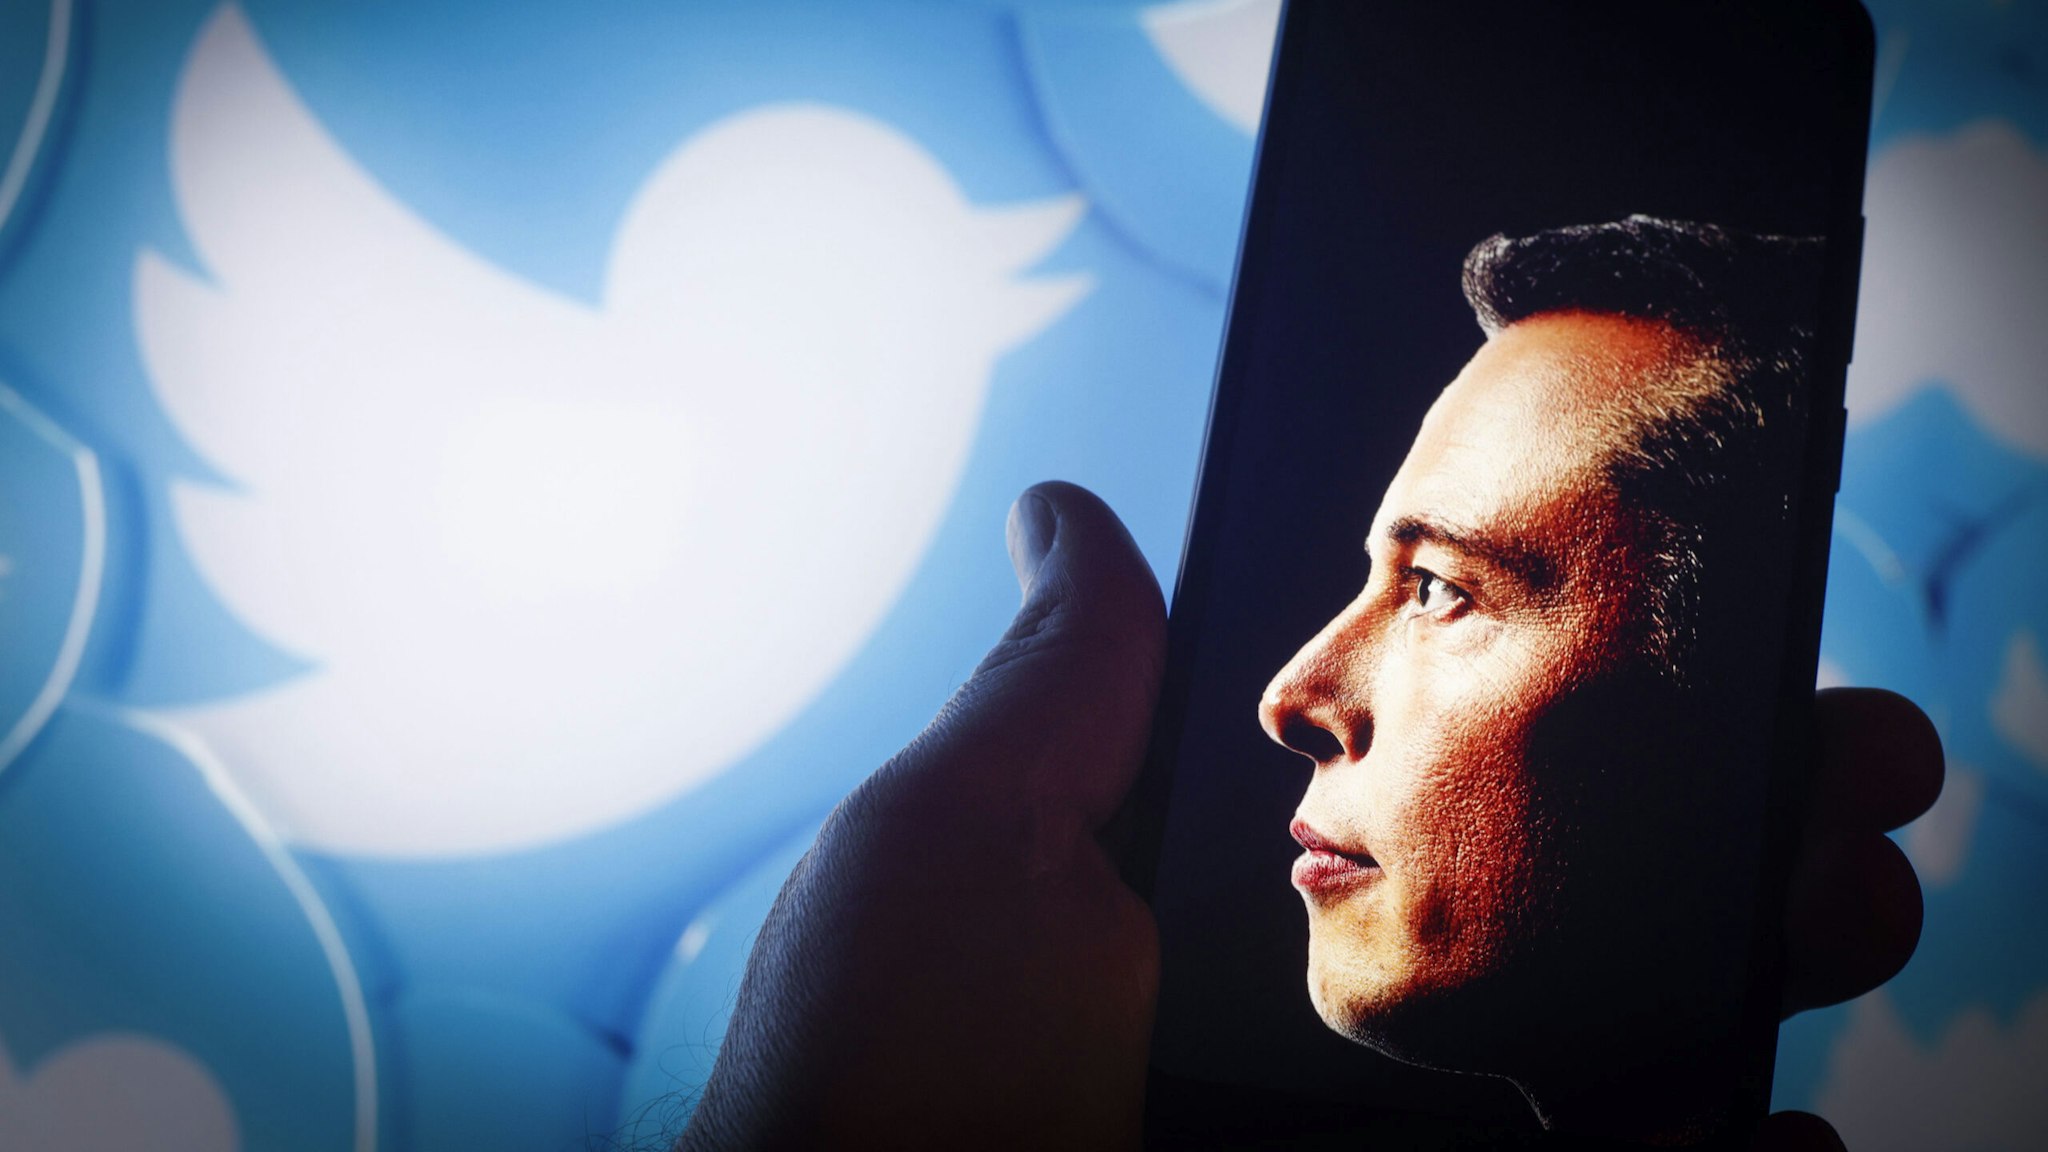 Elon Musk along with the Twitter logo is seen in this illustration photo in Warsaw, Poland on 12 November, 2022. The option to sign up for Twitters new verification service for $7.99 has disappeared from the iOS app after users were abusing it to impersonate brands and famous people.